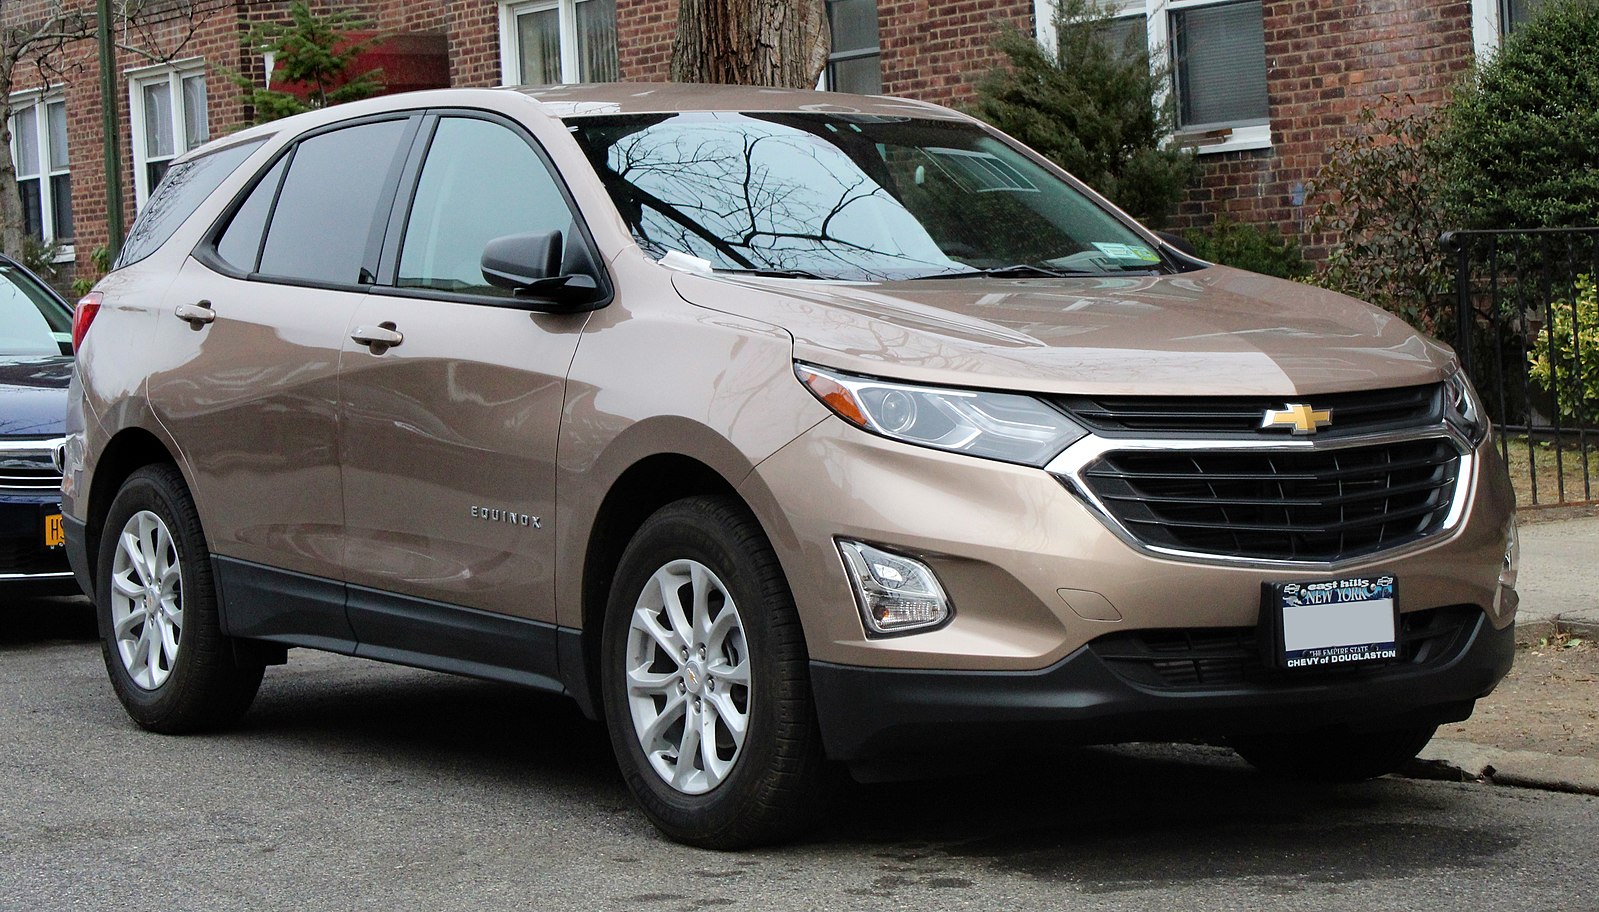 Ranking the Best and Worst Years for the Chevy Equinox